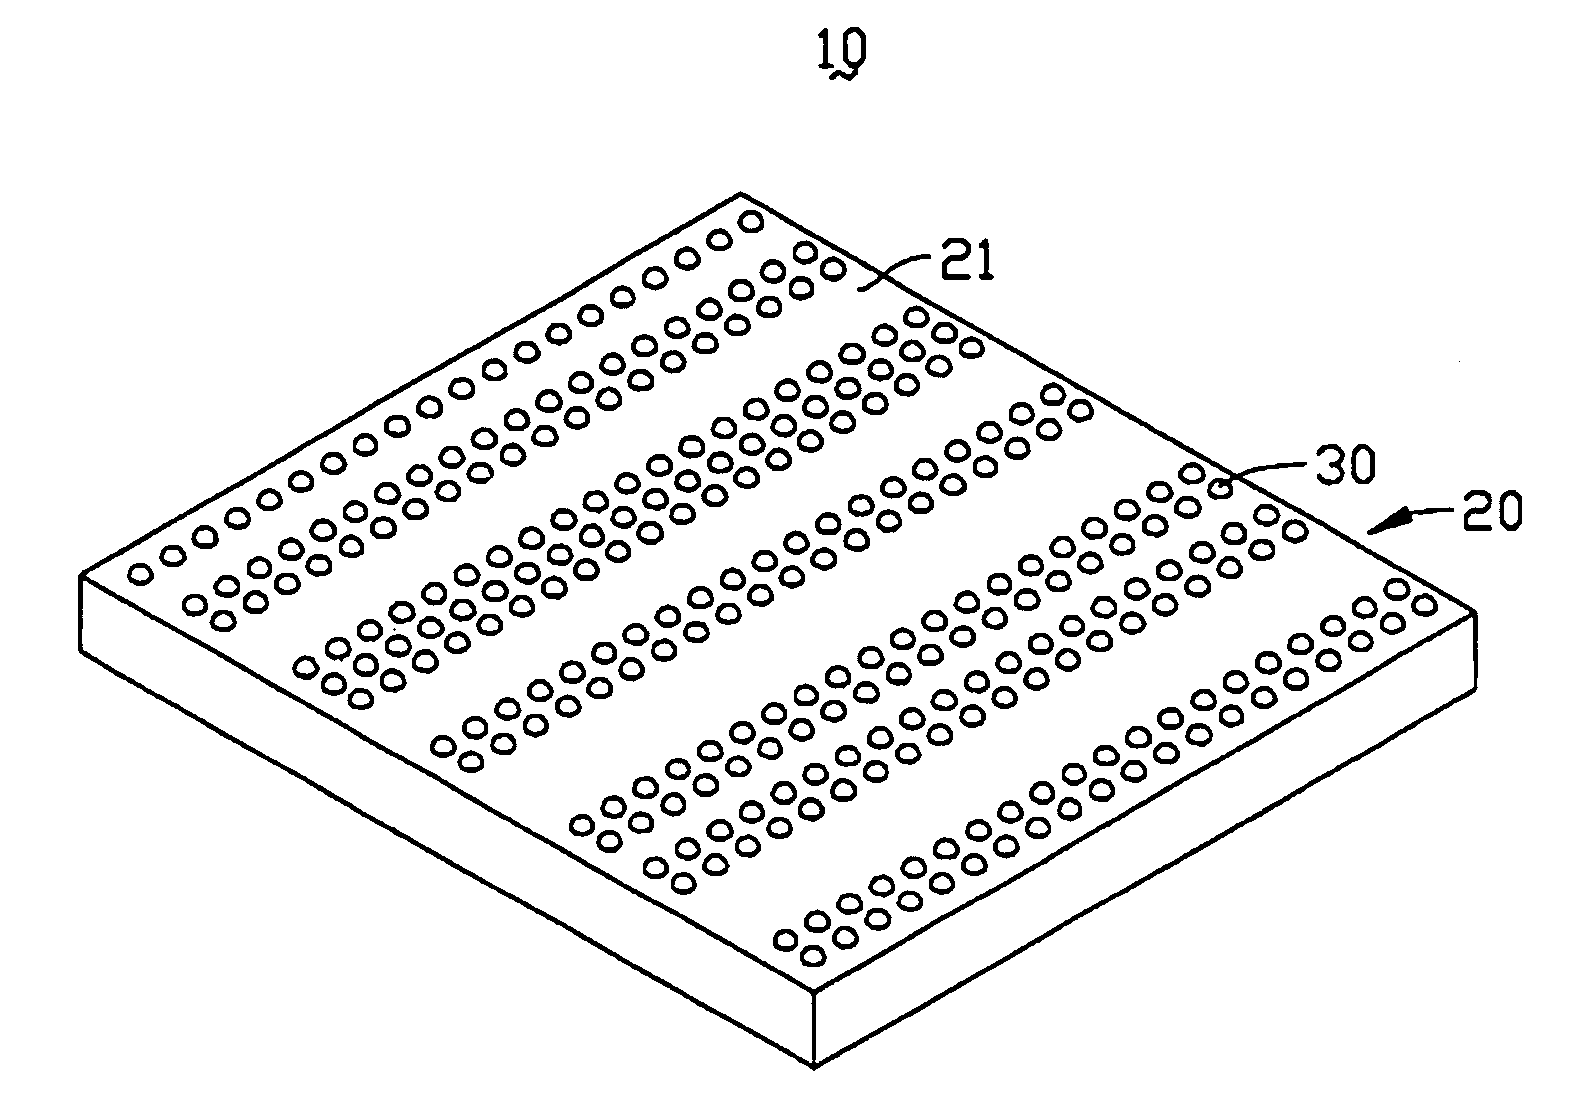 Light guide plate with diffusing protrusions